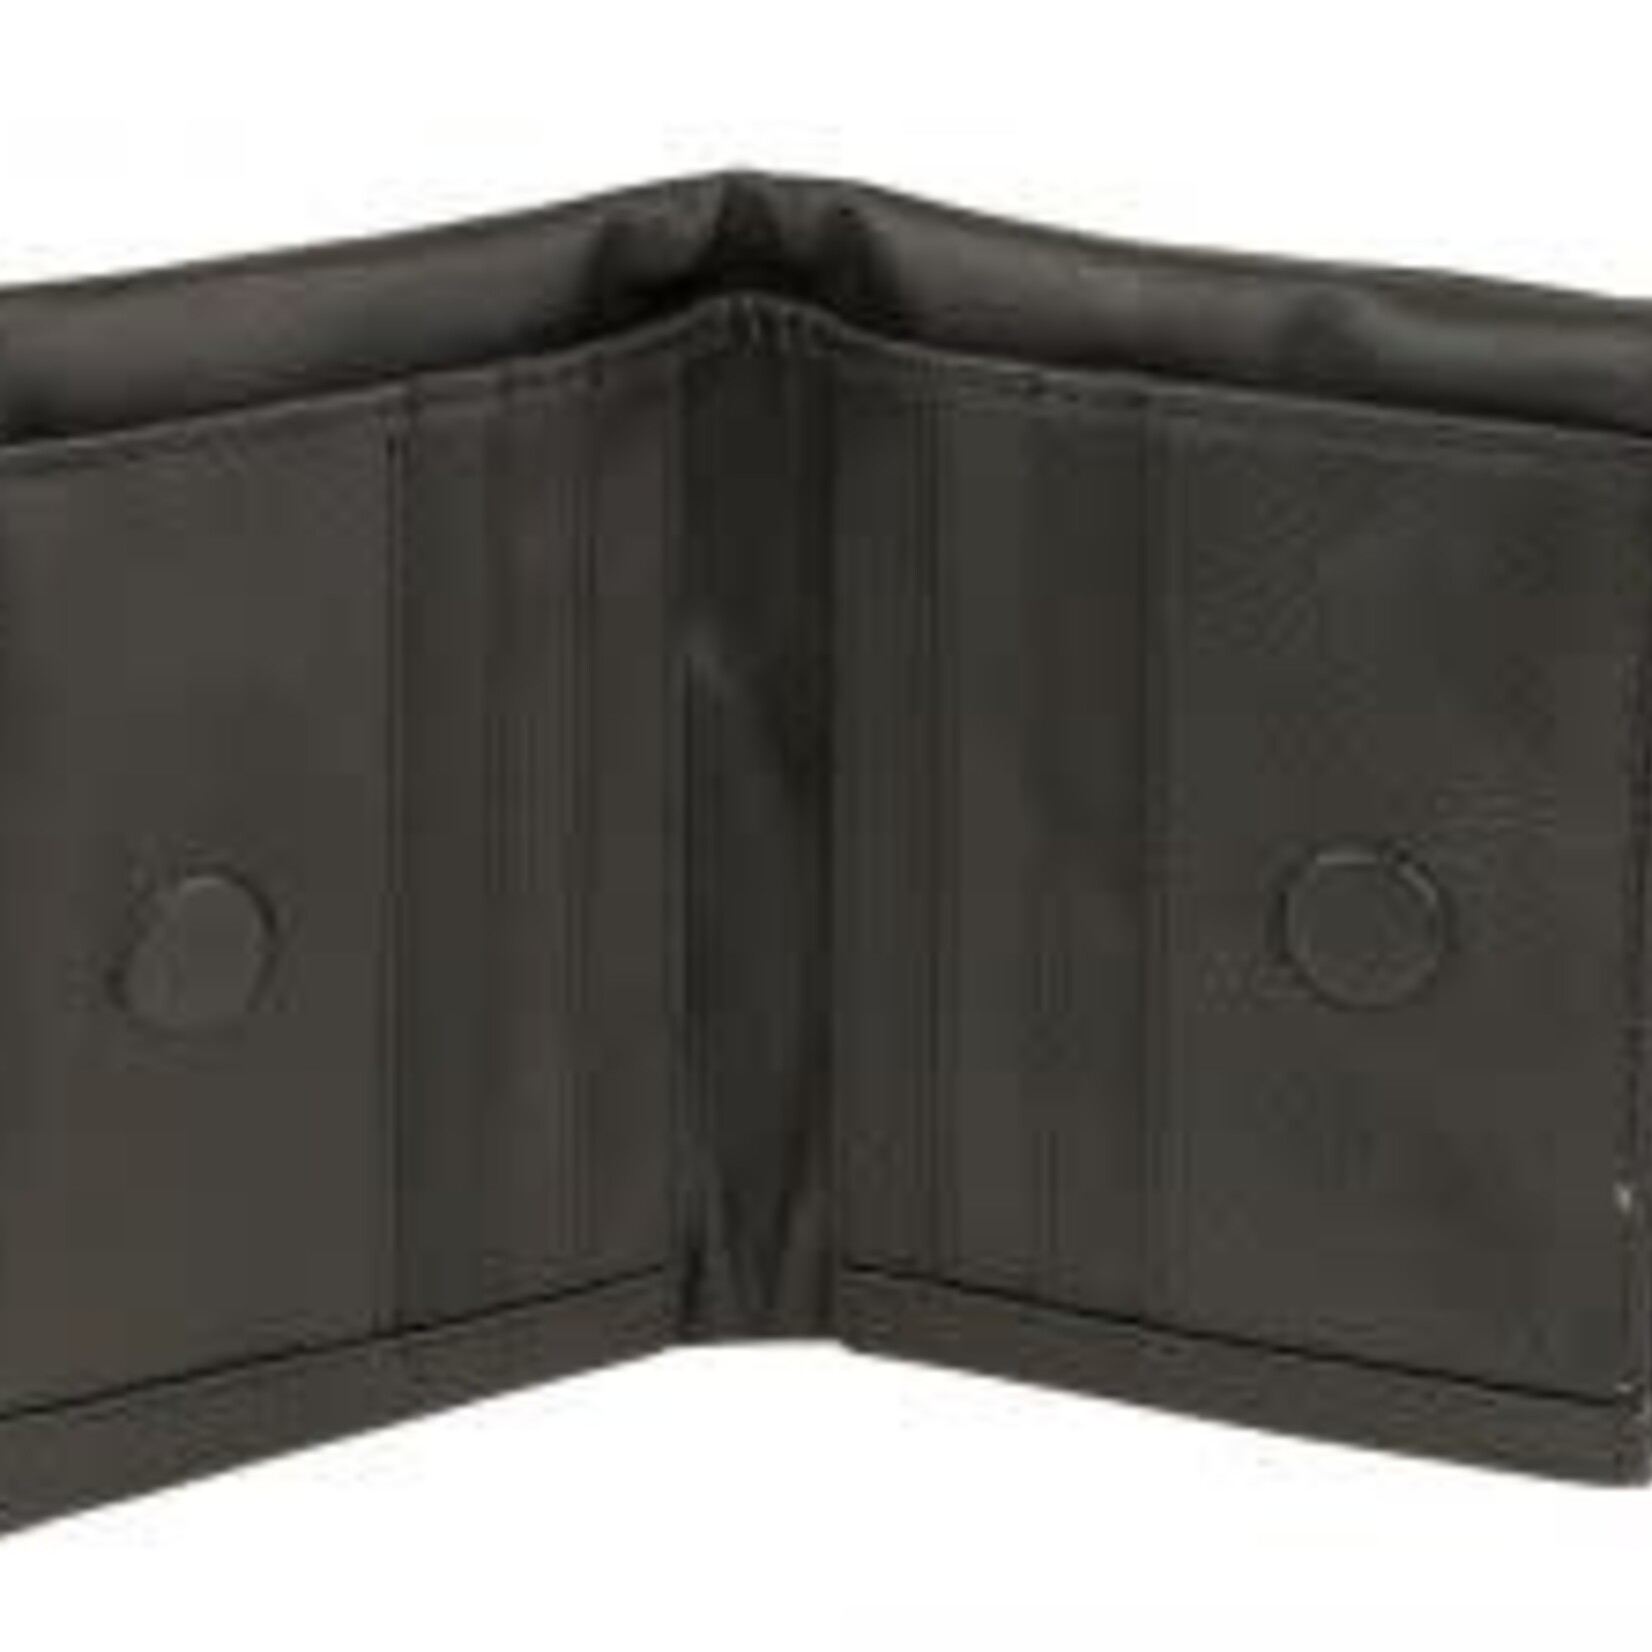 Black Leather Card Coin Purse - One Plus One Fashion